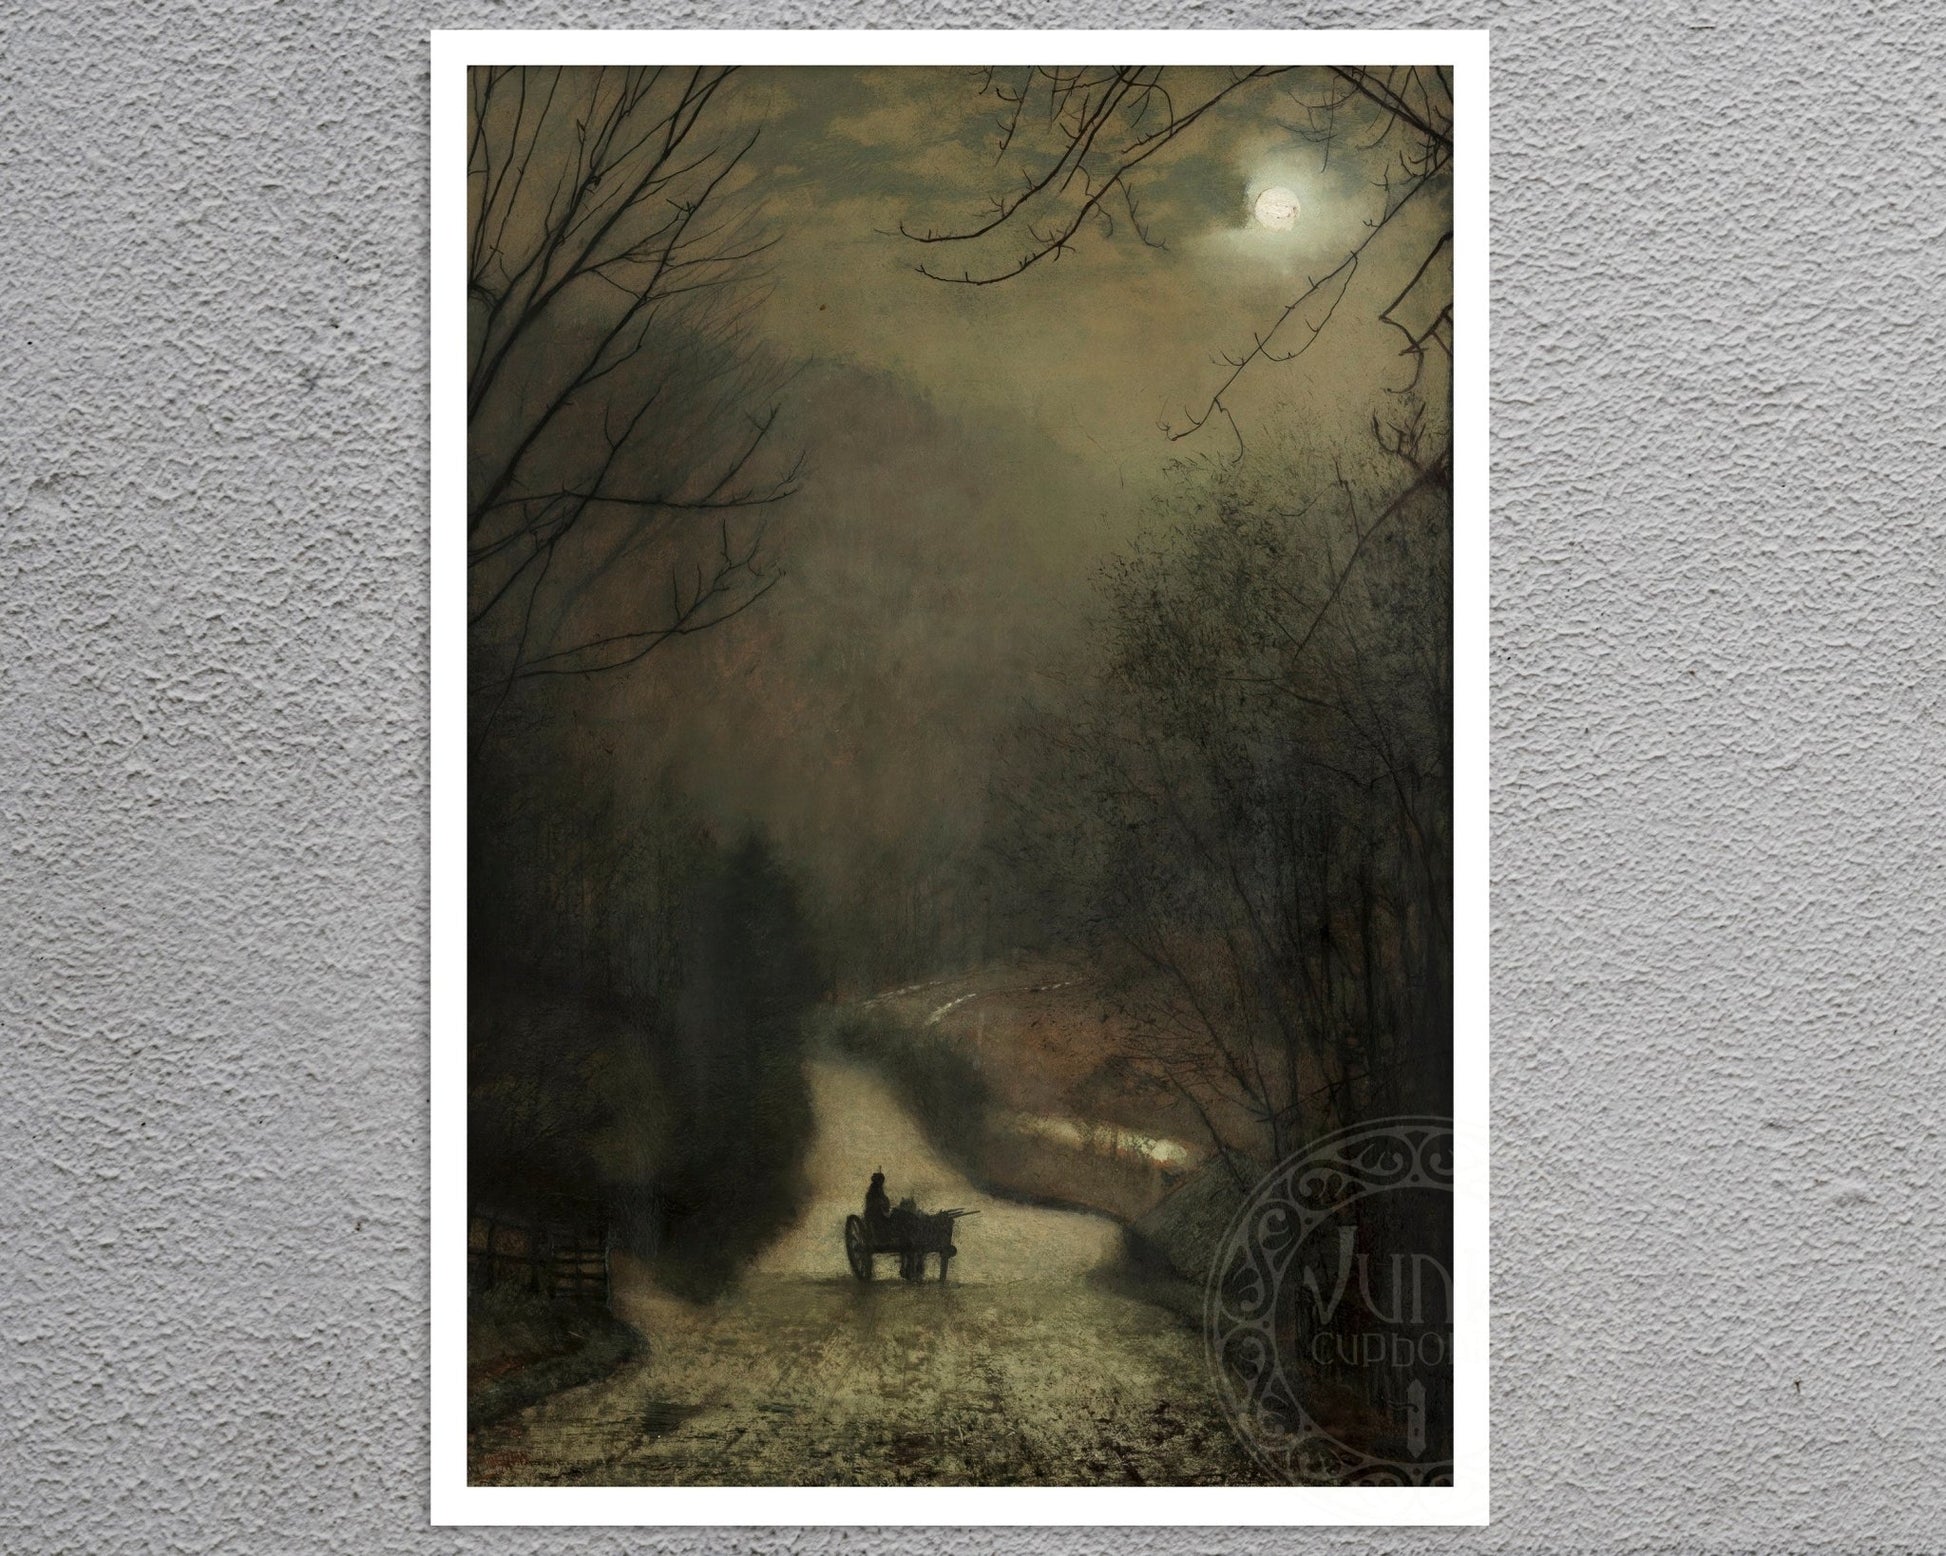 John Atkinson Grimshaw "Forge Valley by Moonlight" (c.1875) - Mabon Gallery